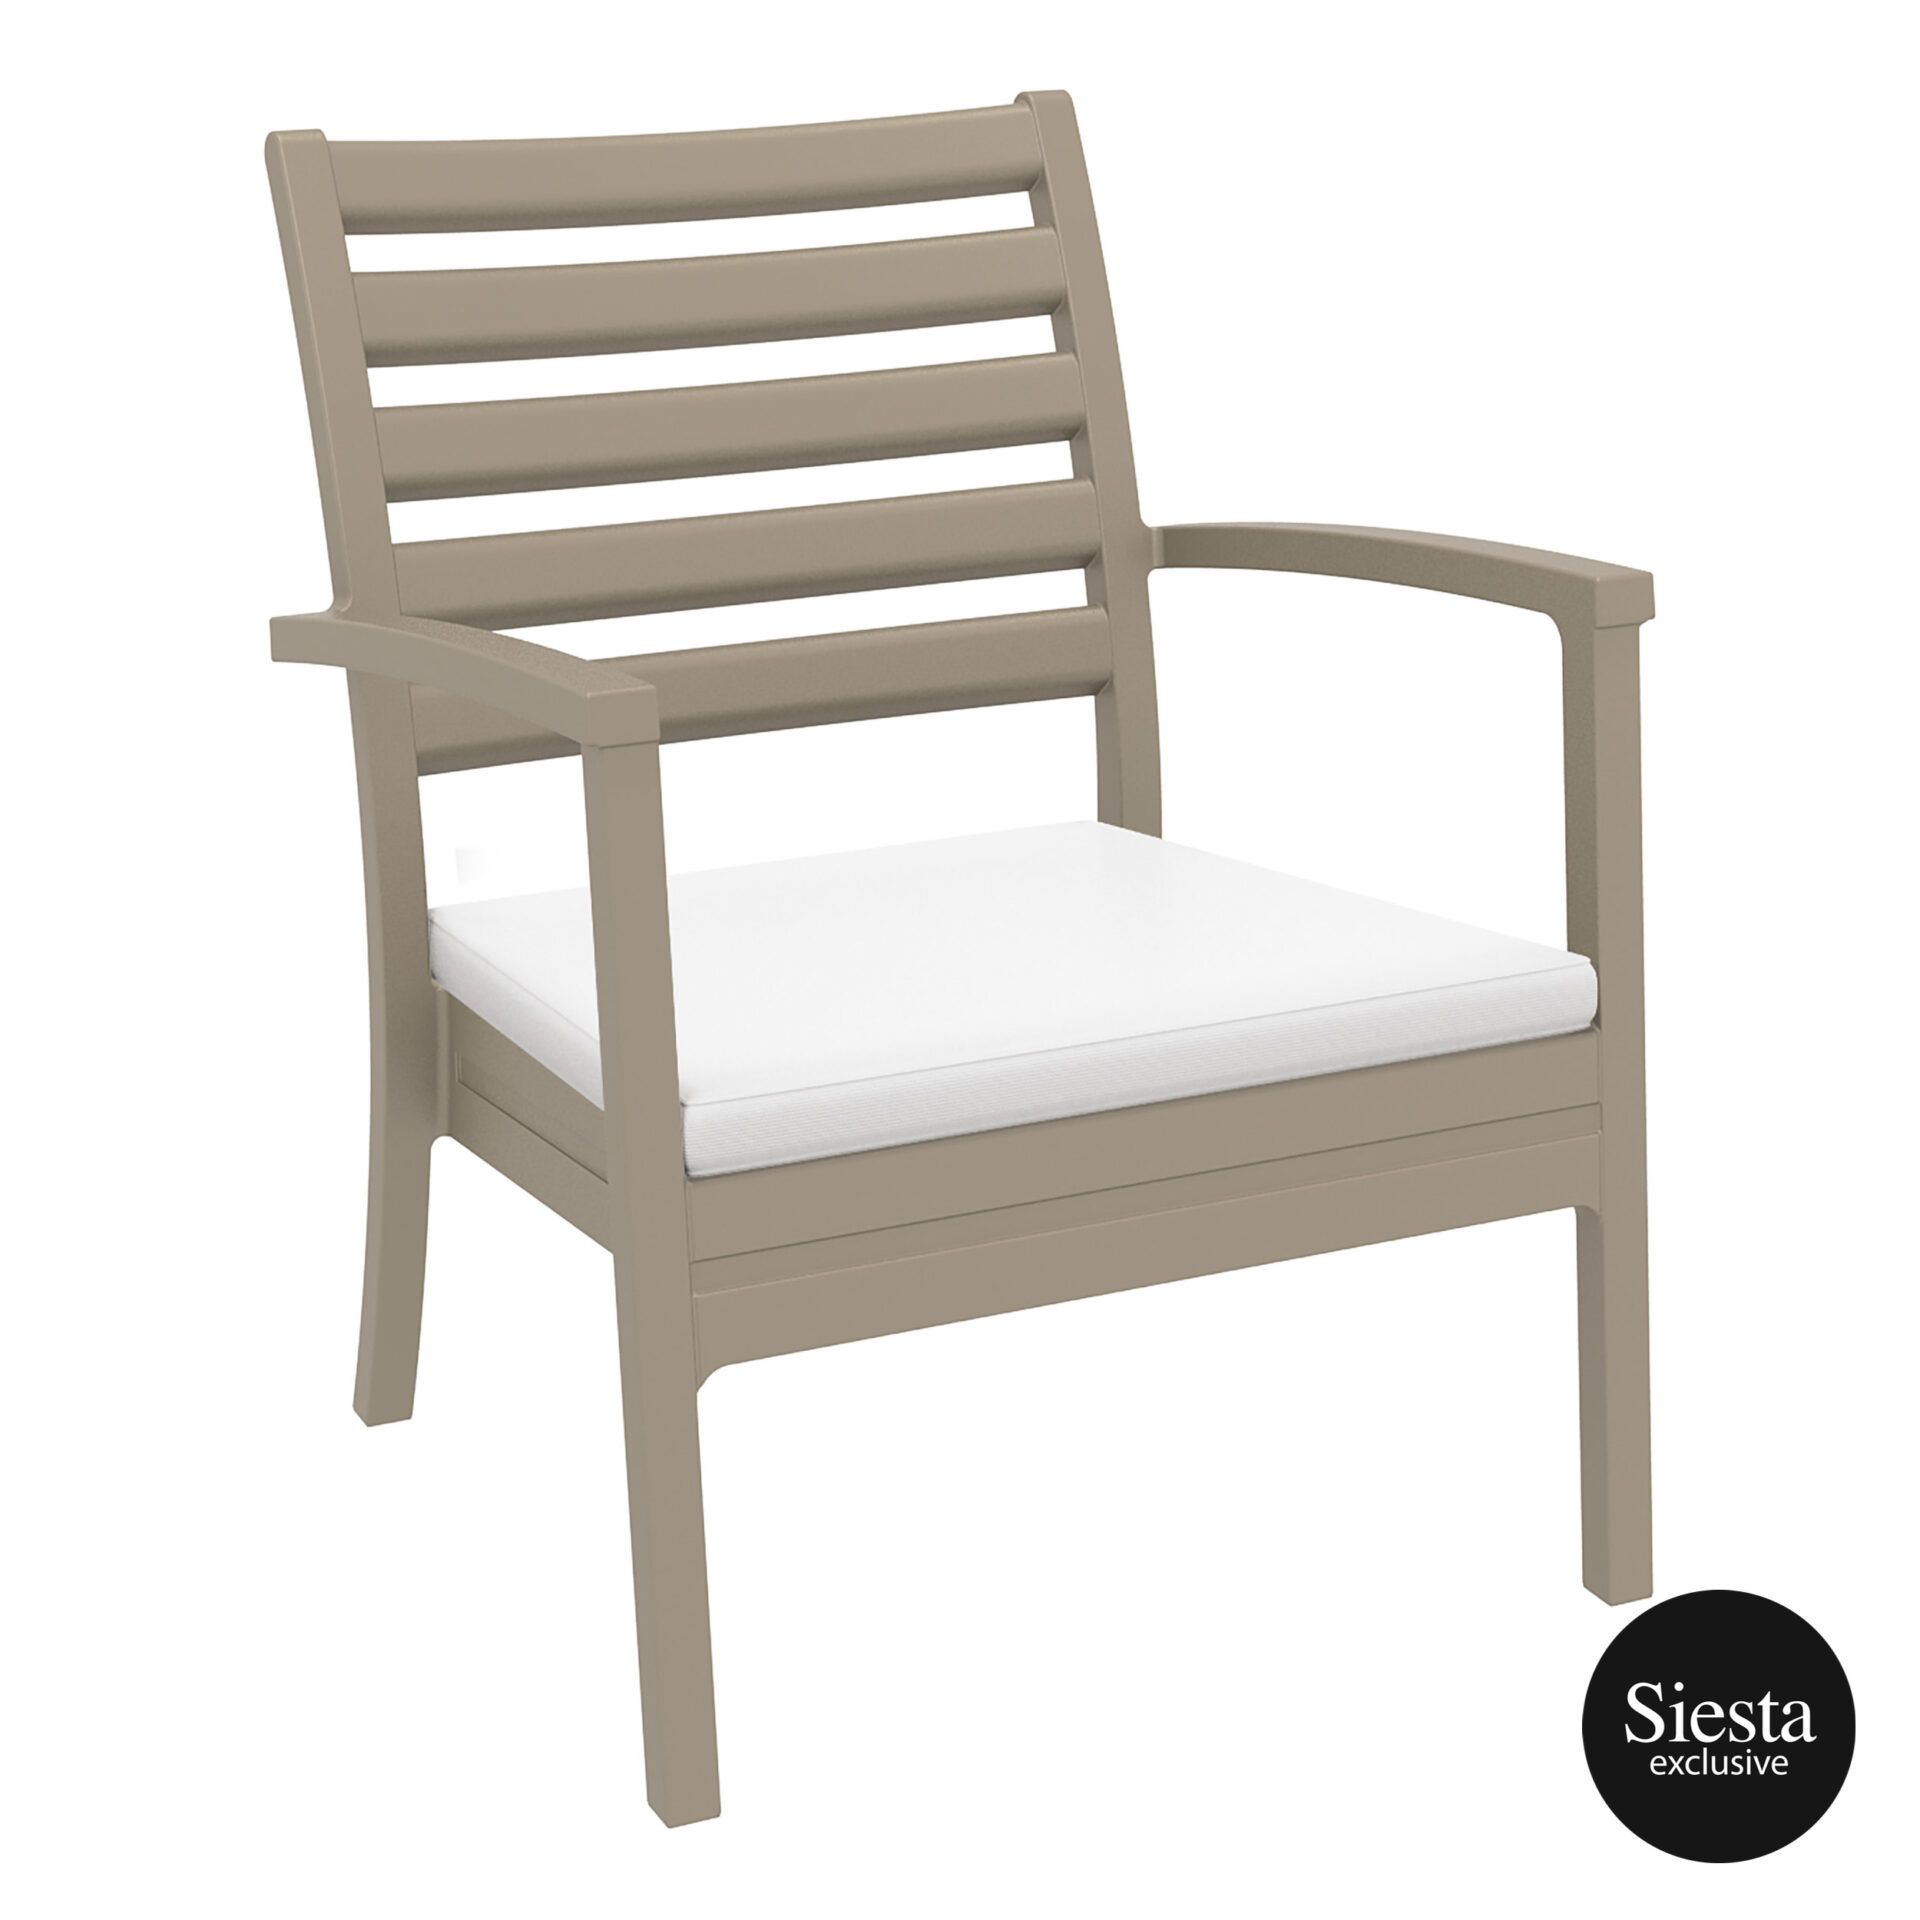 Artemis XL Armchair - Taupe with White Seat Cushion